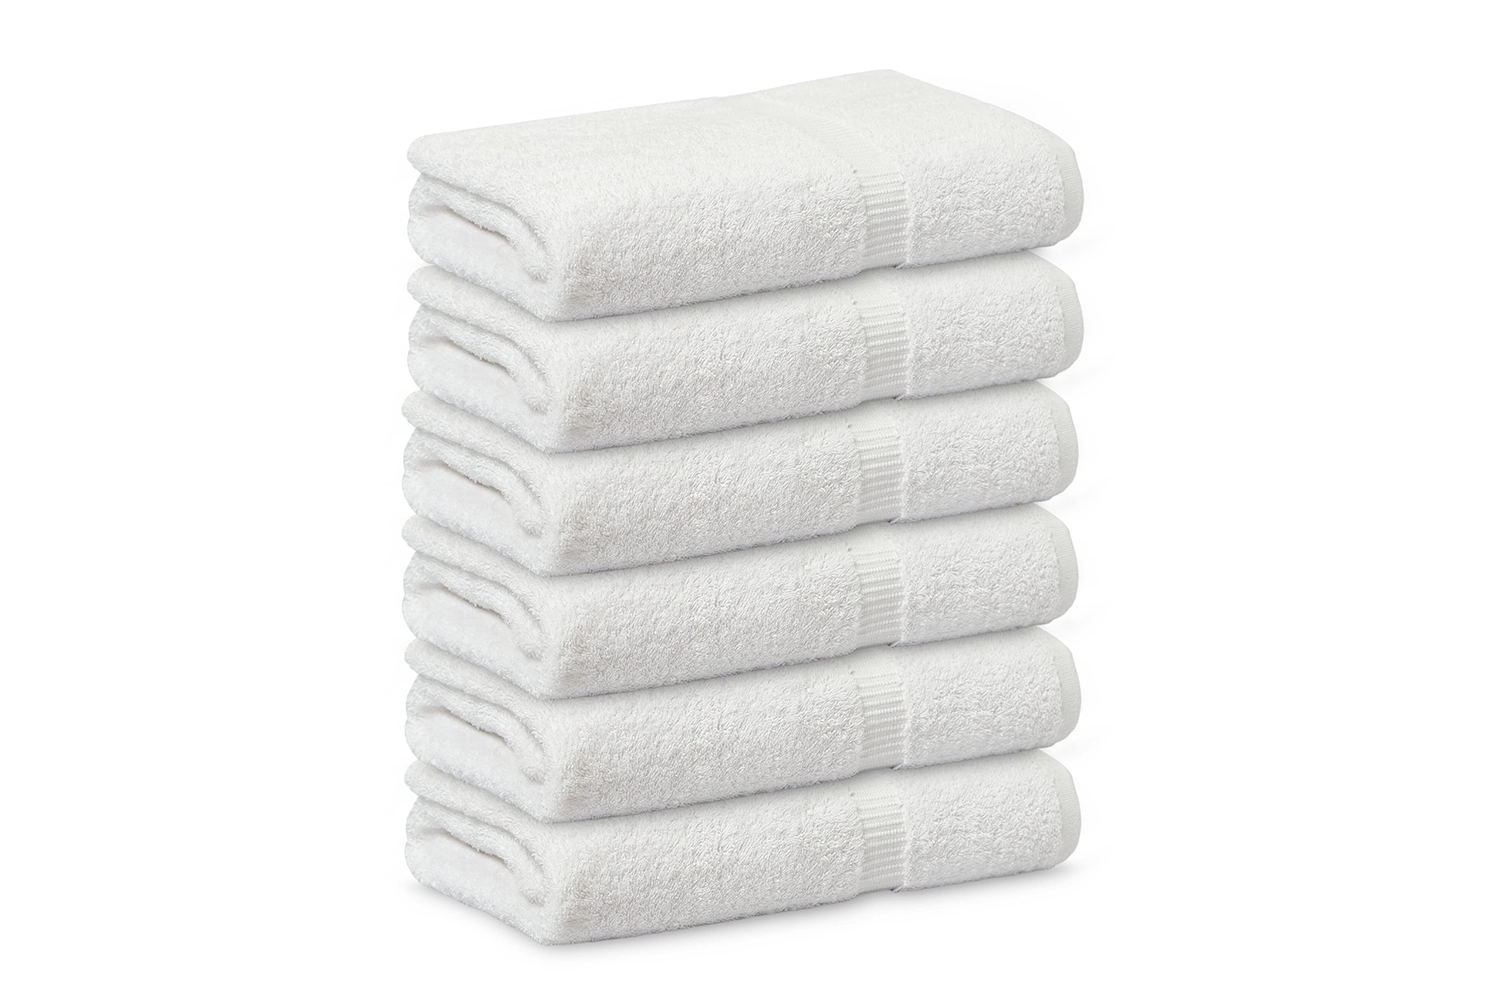 GOLD TEXTILES 36 PCS White Bath Towels Bulk (24x50 Inches) - Light Weight  Easy-Care Commercial Grade (36)